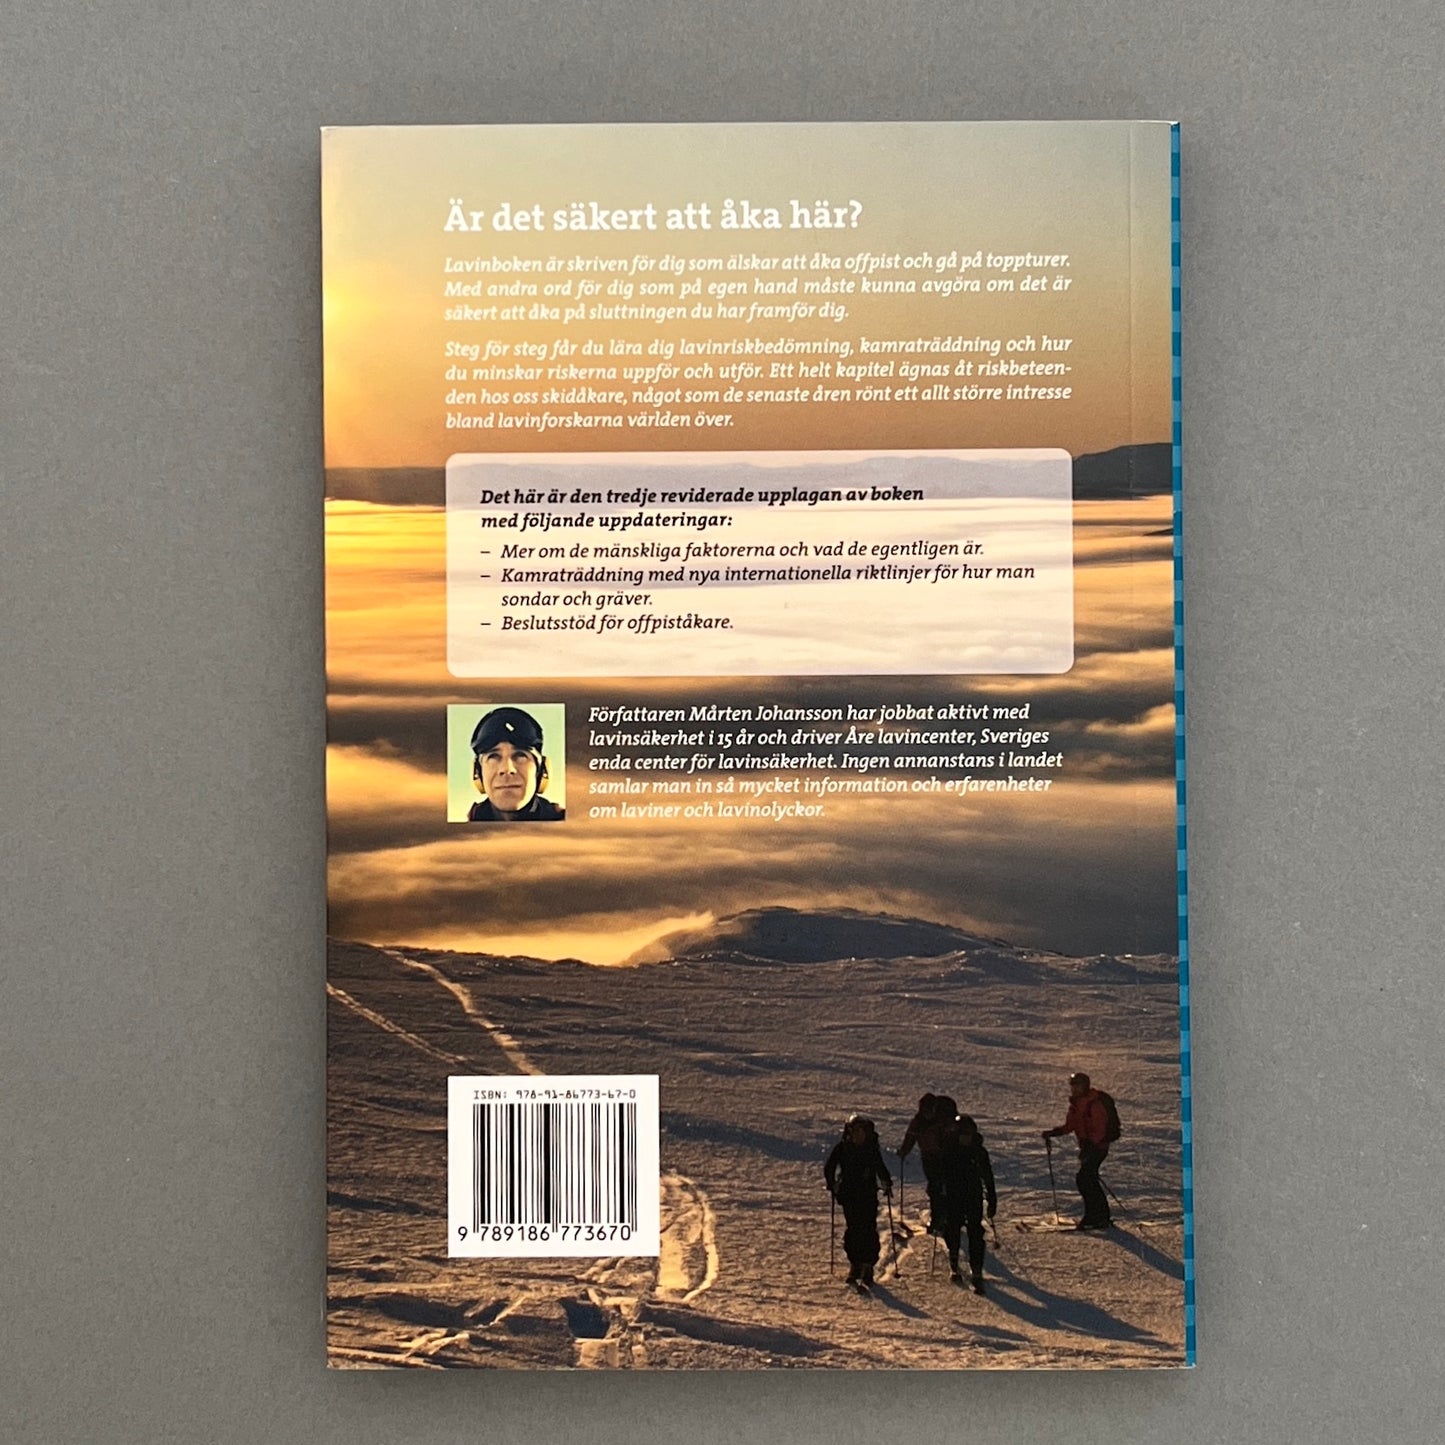 The backside of a book with a picture of people skiing and a summary of the book.